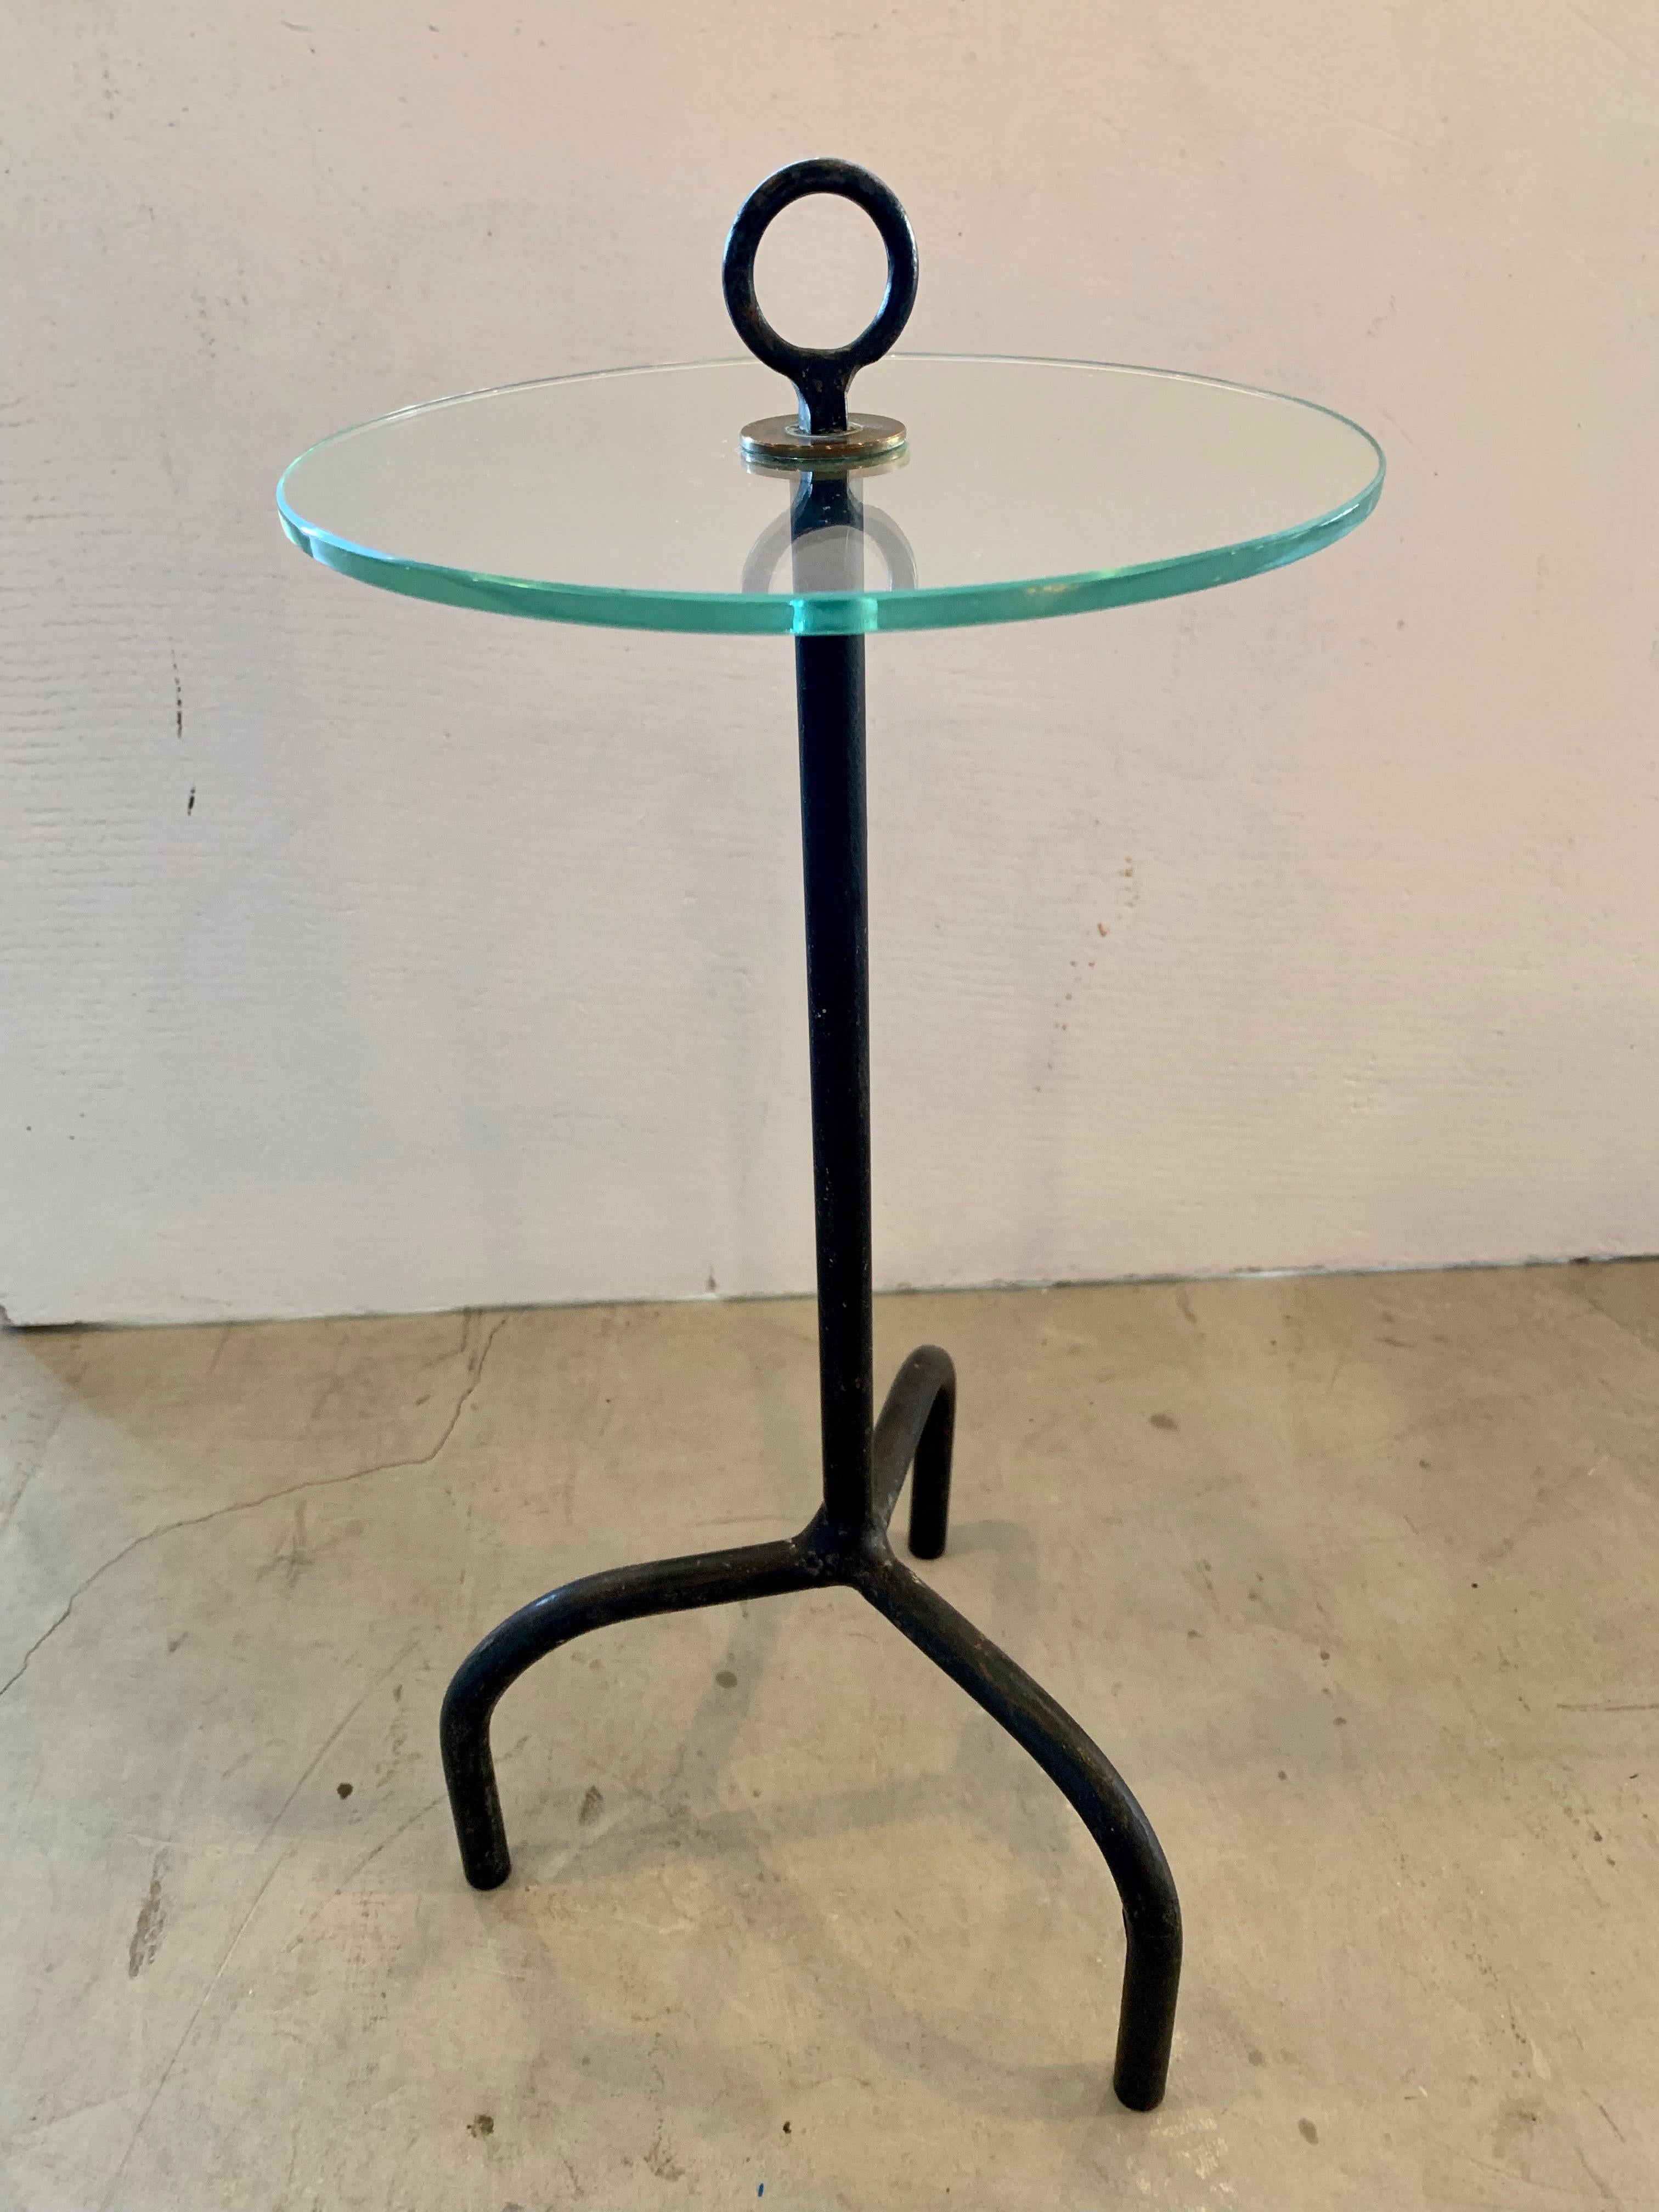 Classic French iron and glass cocktail table. Iron tripod frame with glass table and circular loop on top. Perfect petite table. Very good condition. 

Diameter of glass is just under 8